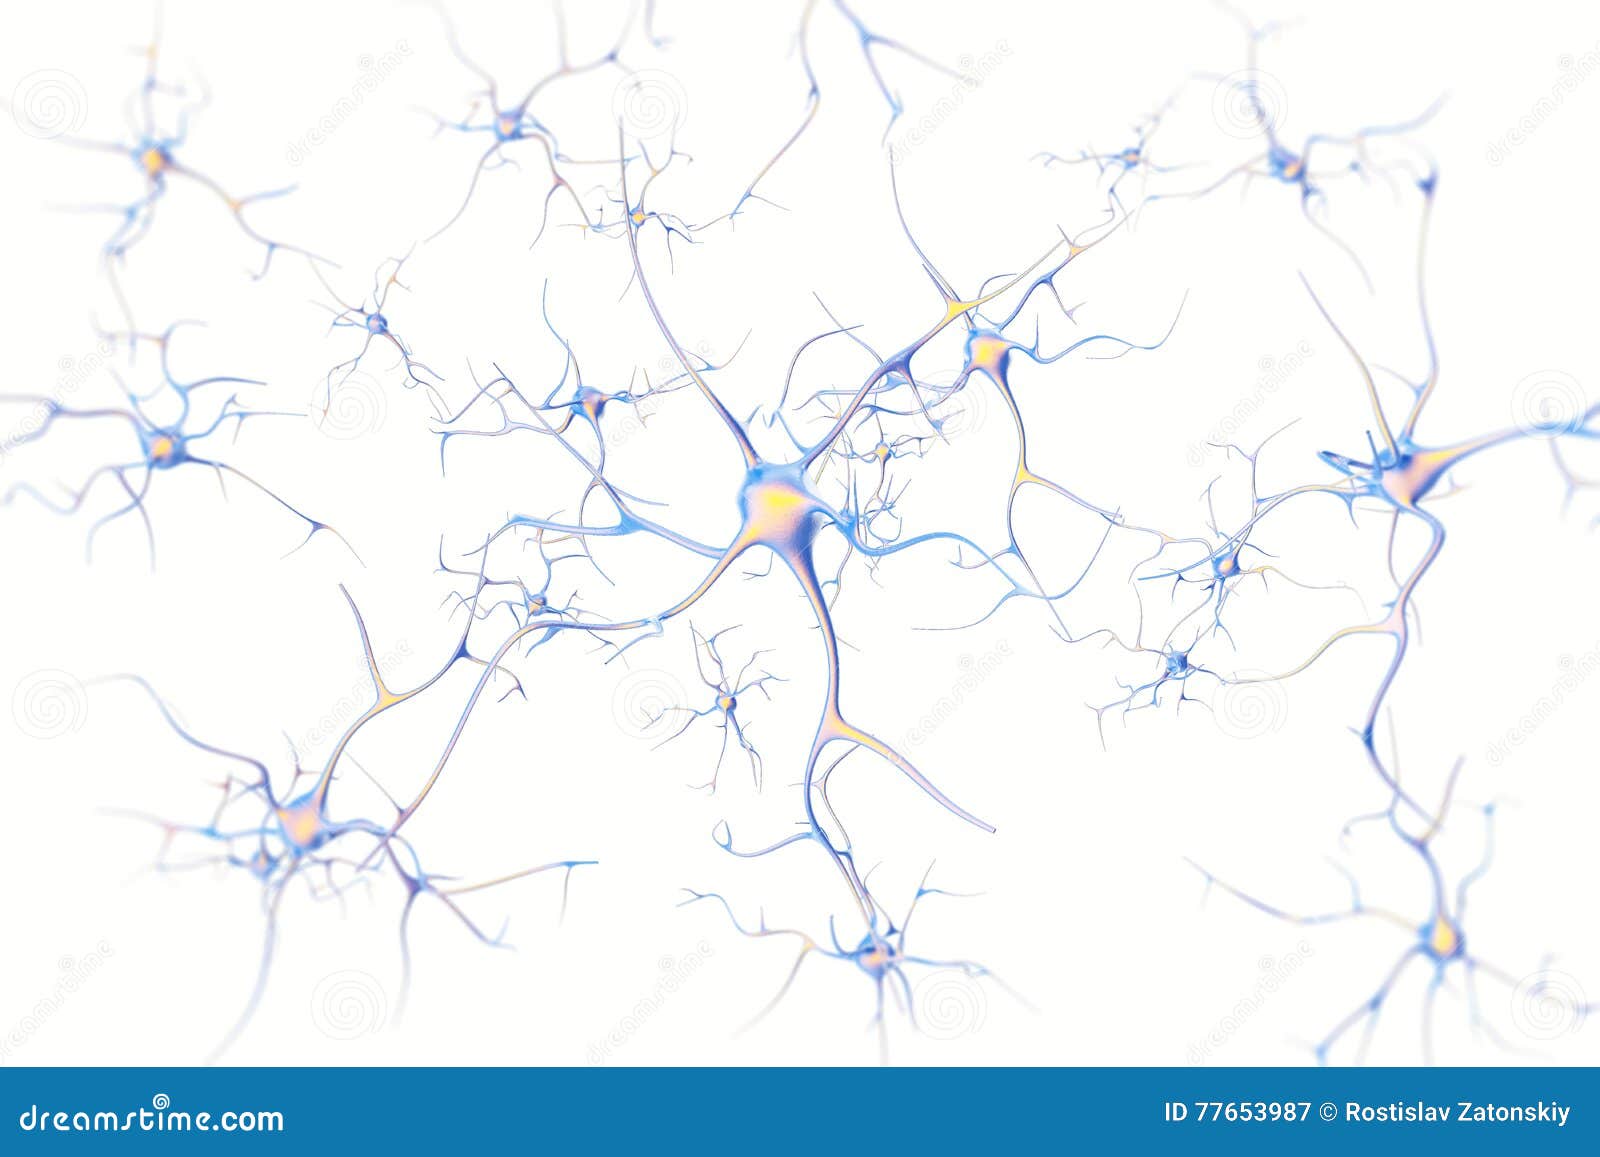 neurons in the brain on white background with focus effect. 3d rendering